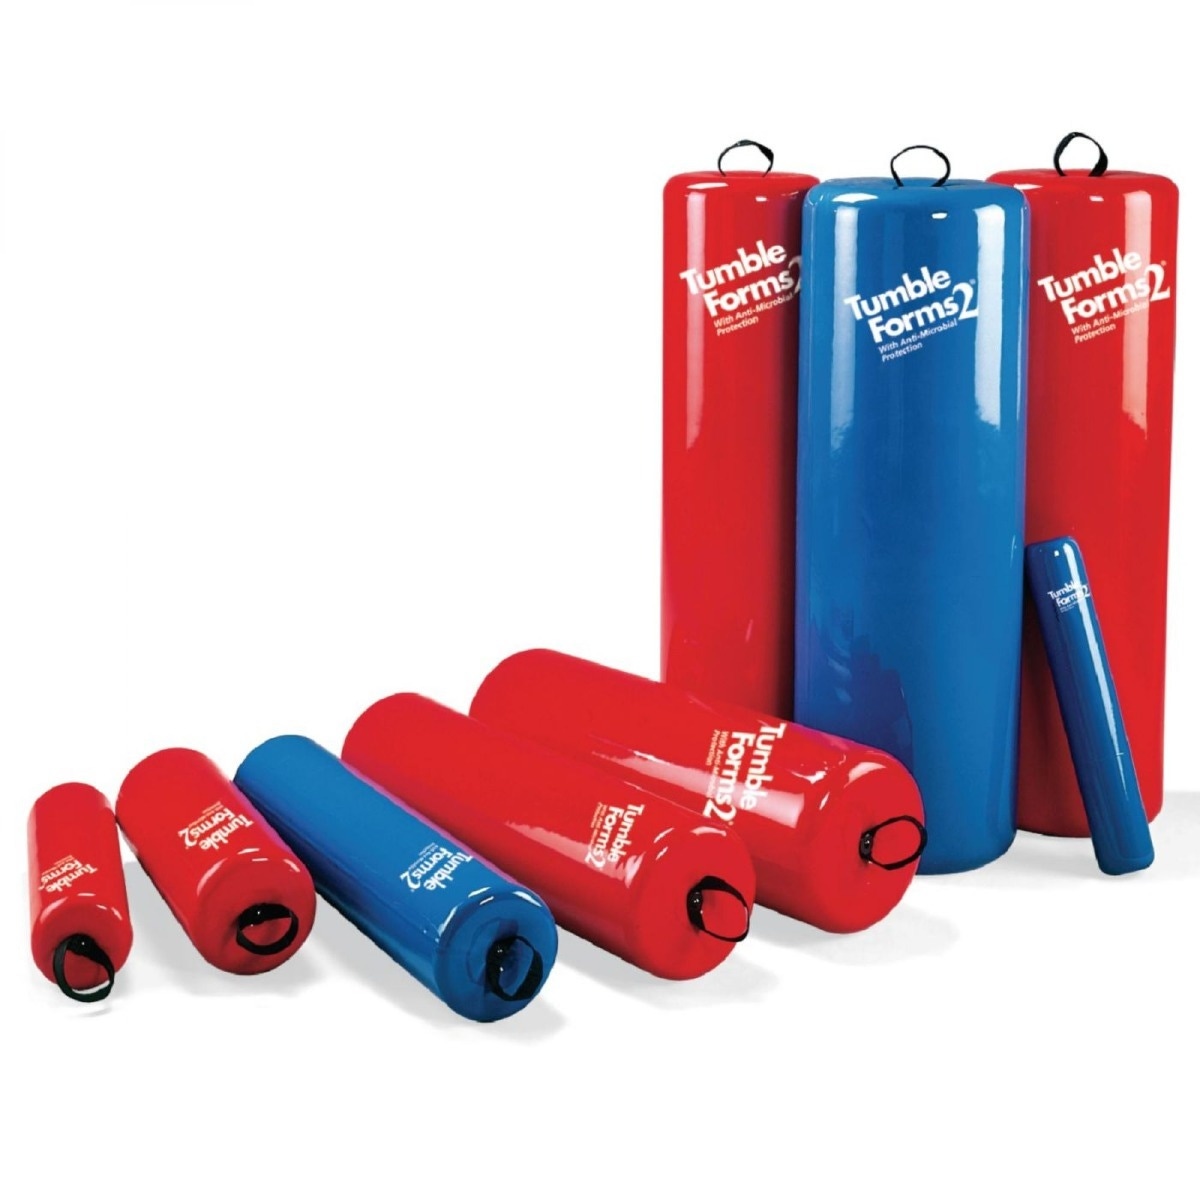 Therapy rolls in variety of sizes and in two different colors: red and blue.